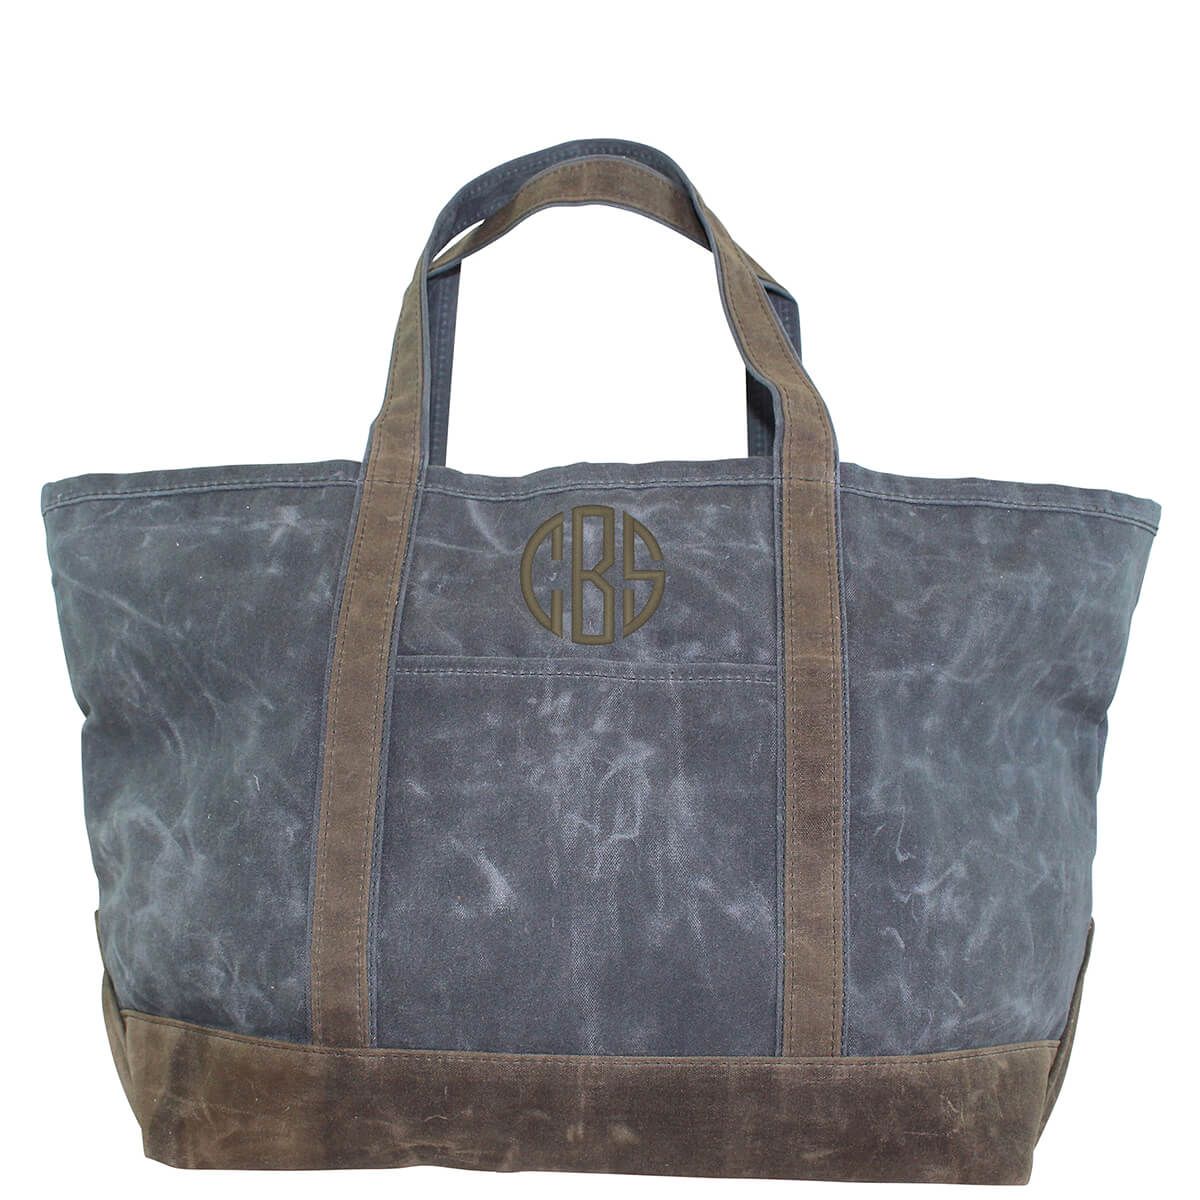 Monogrammed Large Boat Tote Waxed Canvas Travel Beach Monogram